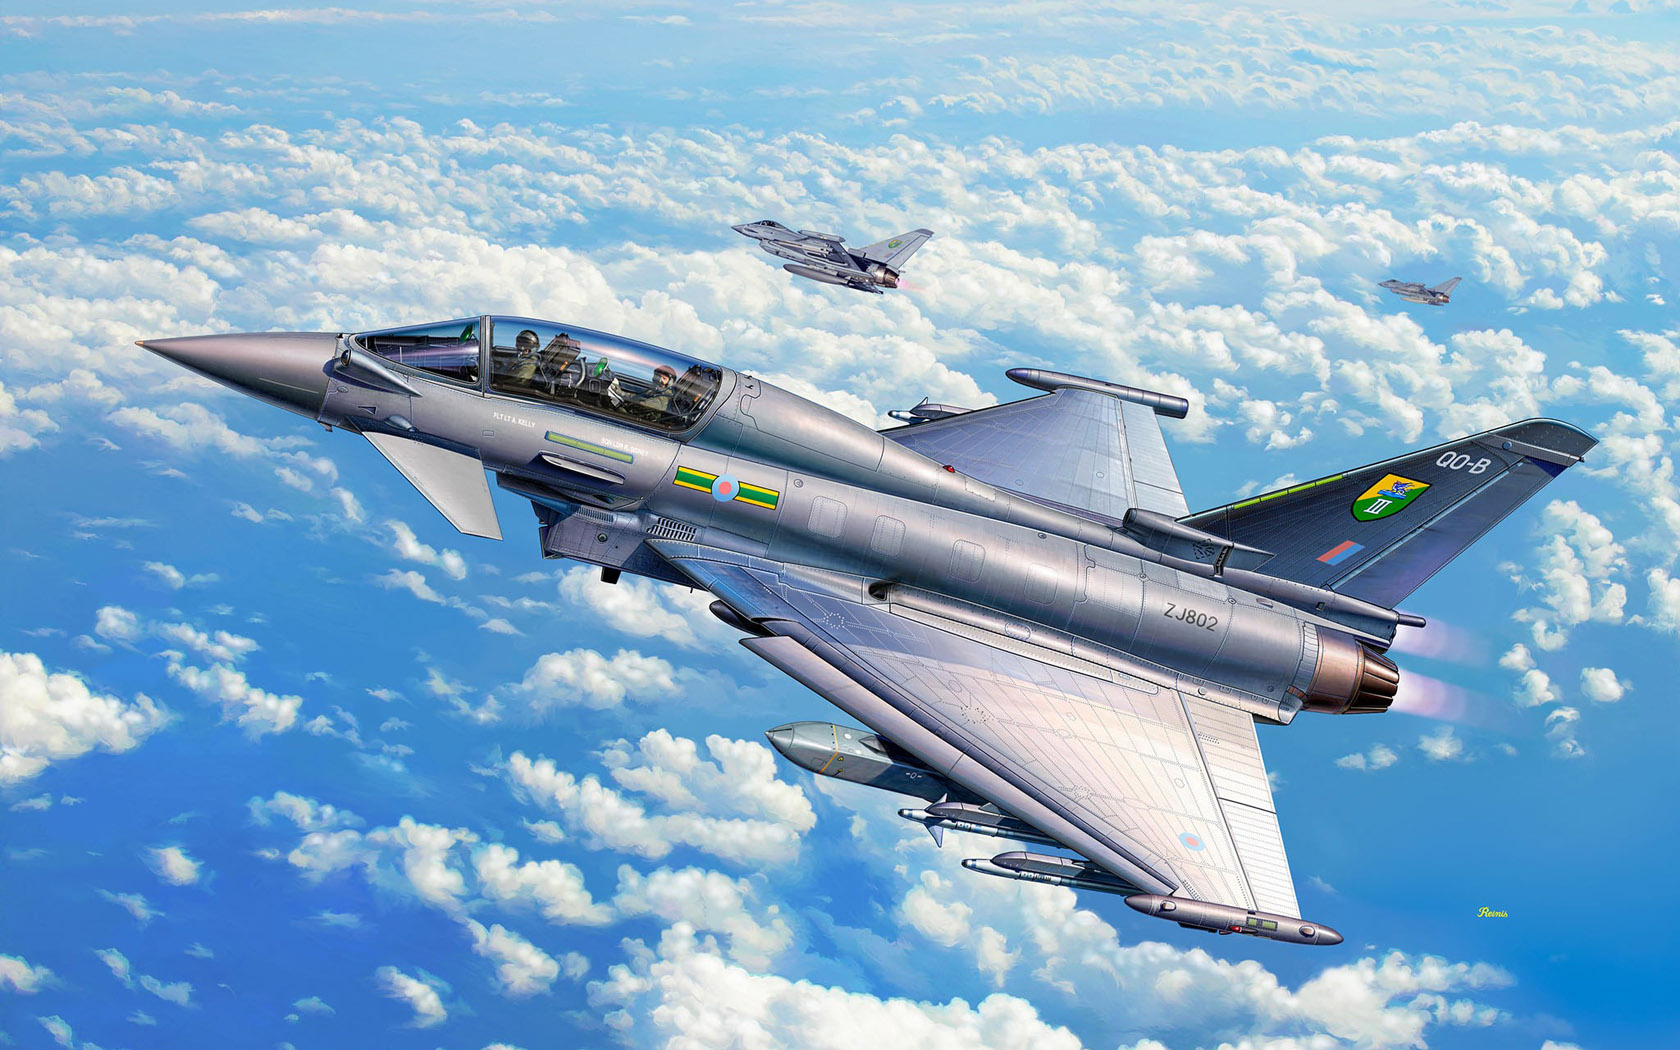 General 1680x1050 aircraft flying sky military military vehicle artwork missiles clouds air force Eurofighter Typhoon Boxart jet fighter Royal Navy